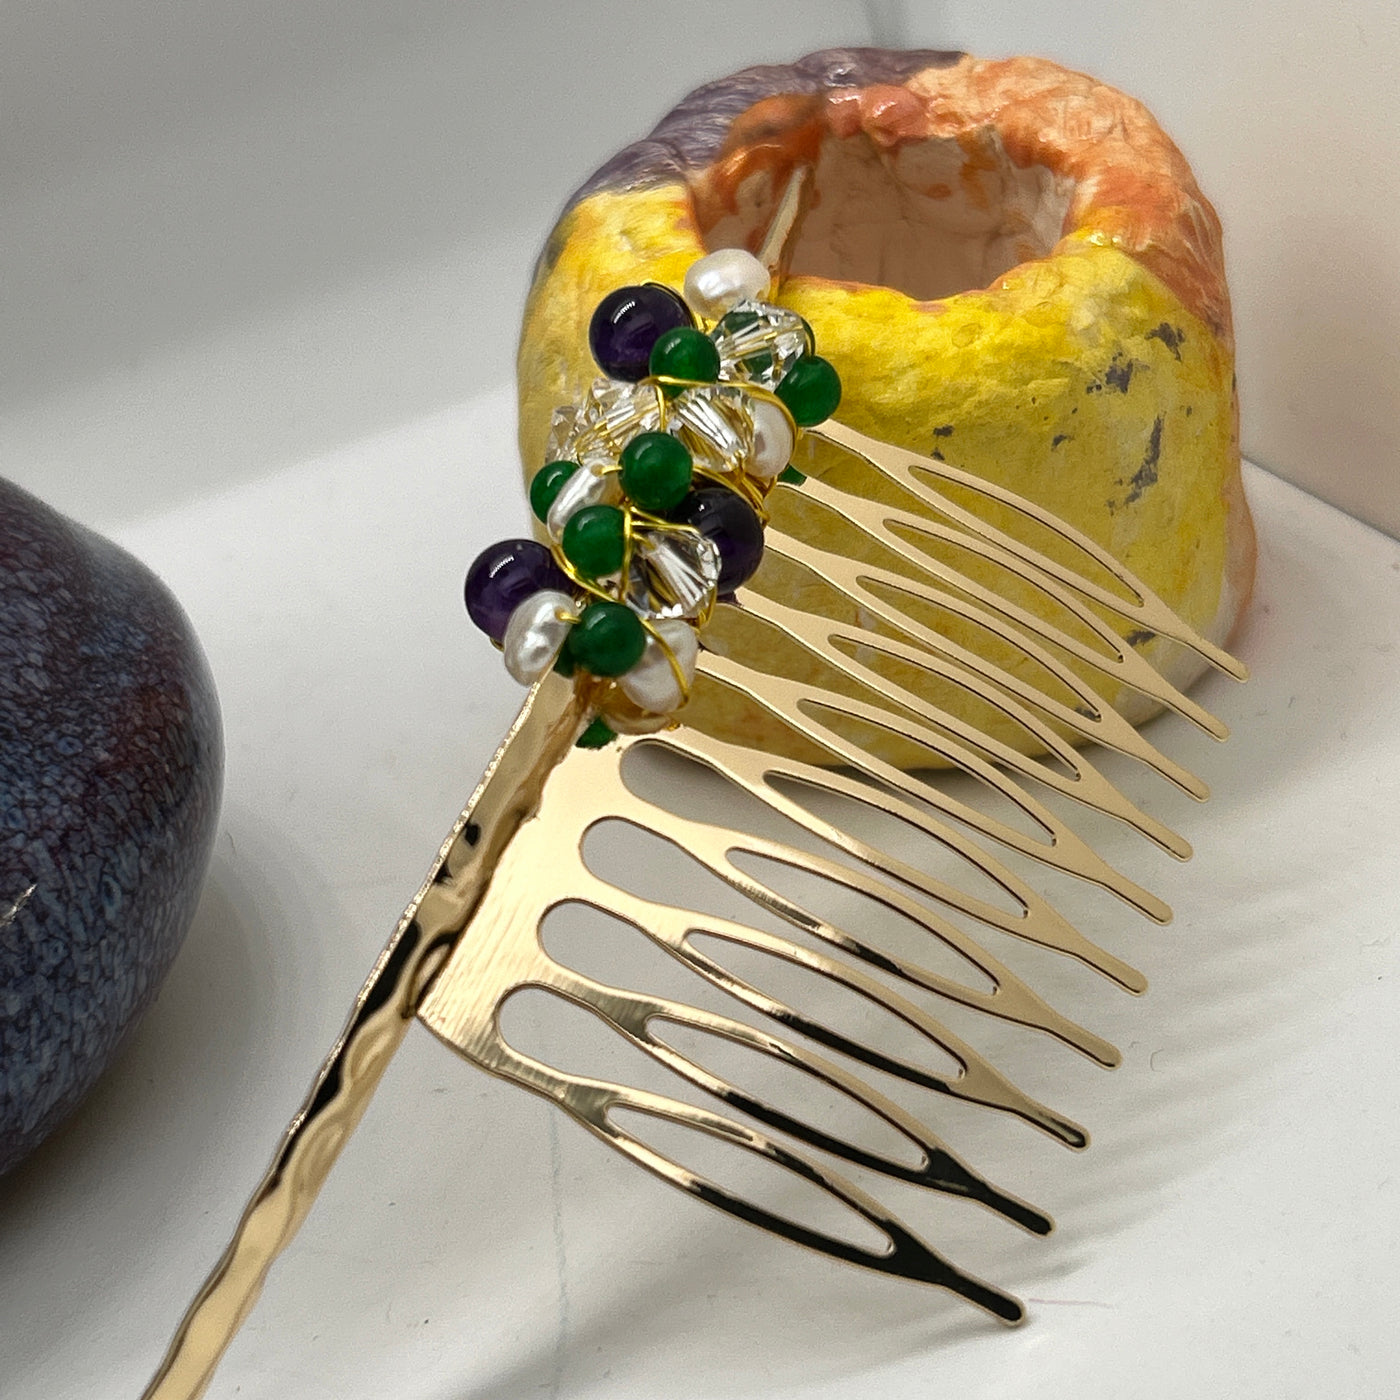 Haircomb 11- Green calchedony, amethysts, swaroski, pearls  and golden wire for this hair combs simple tuck ten teeth metal combs gold color